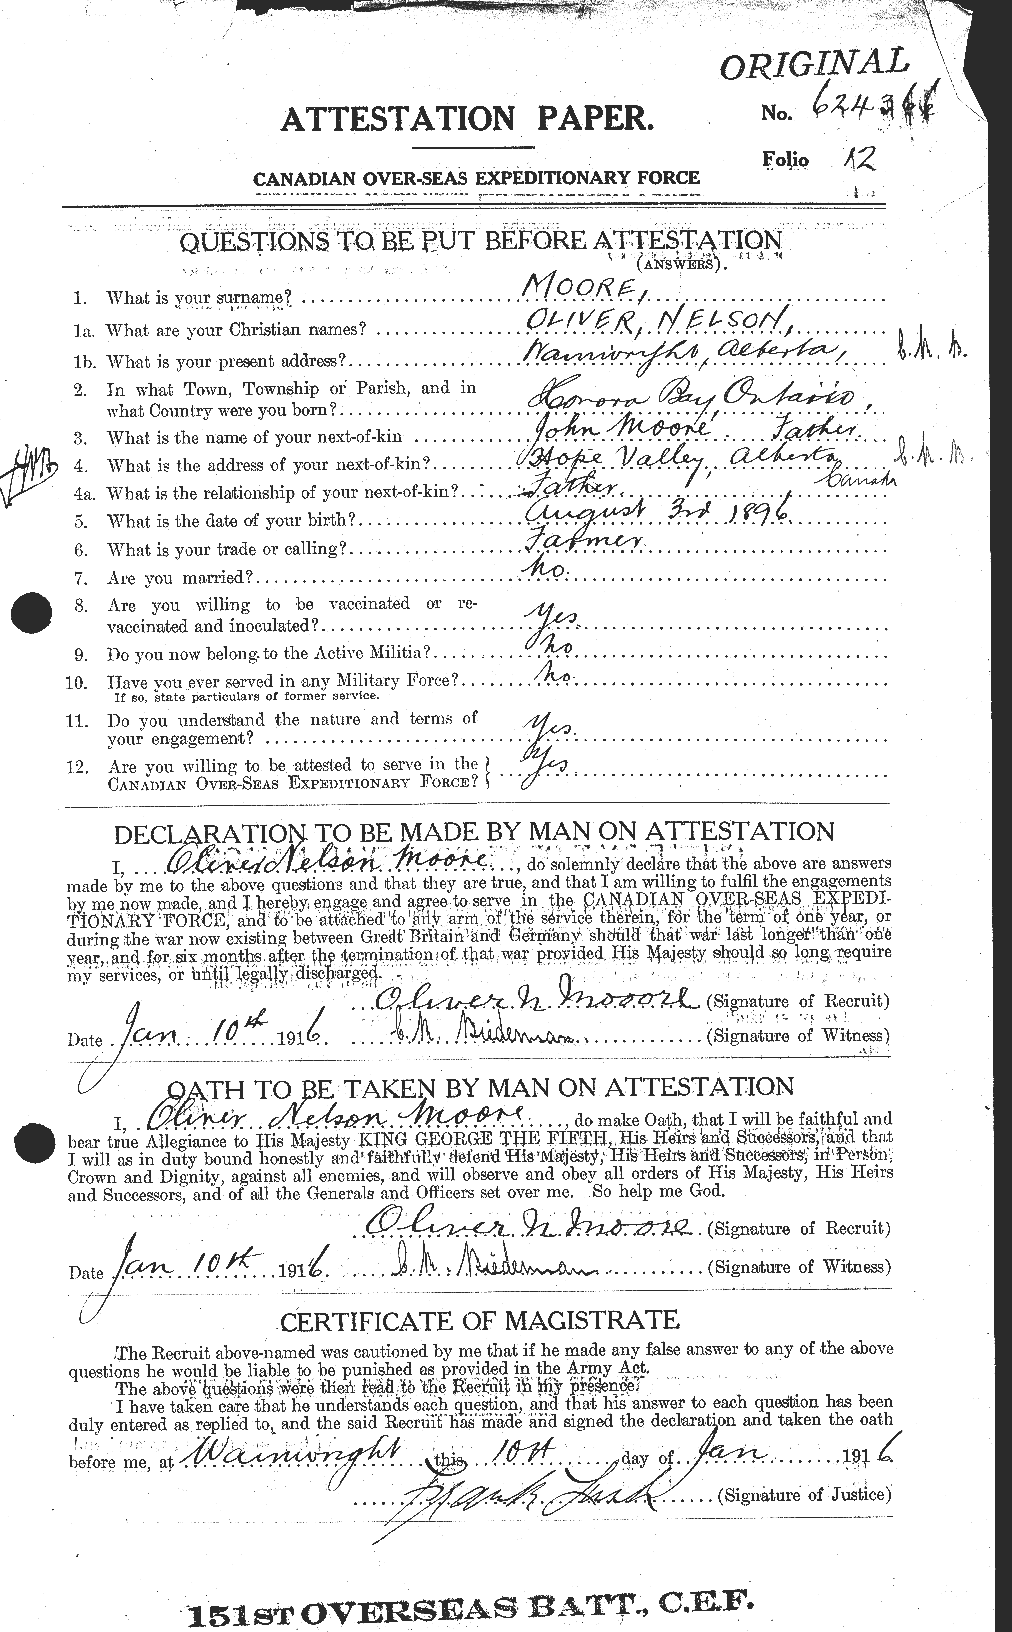 Personnel Records of the First World War - CEF 503467a